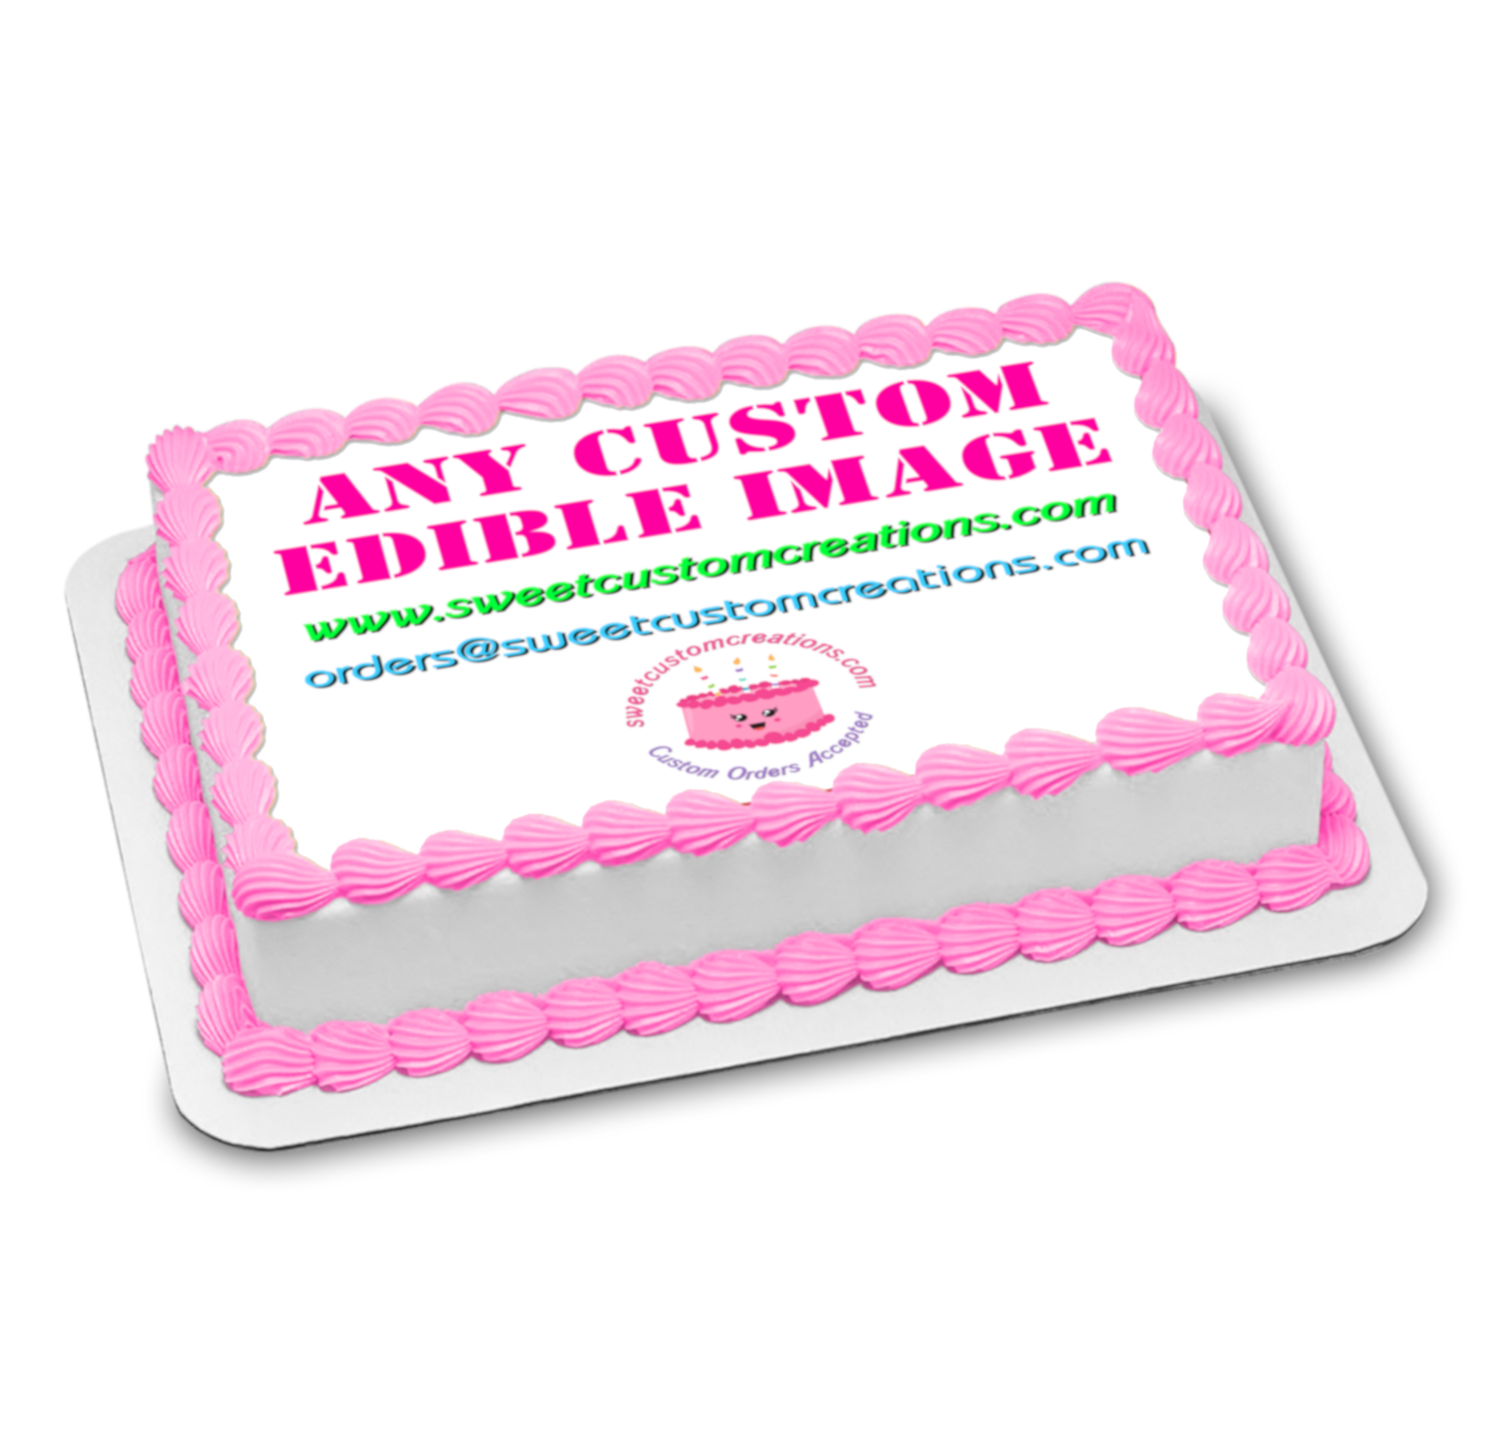 Frosting and Icing Sheets, Edible Images, Cakes, Cupcakes & More